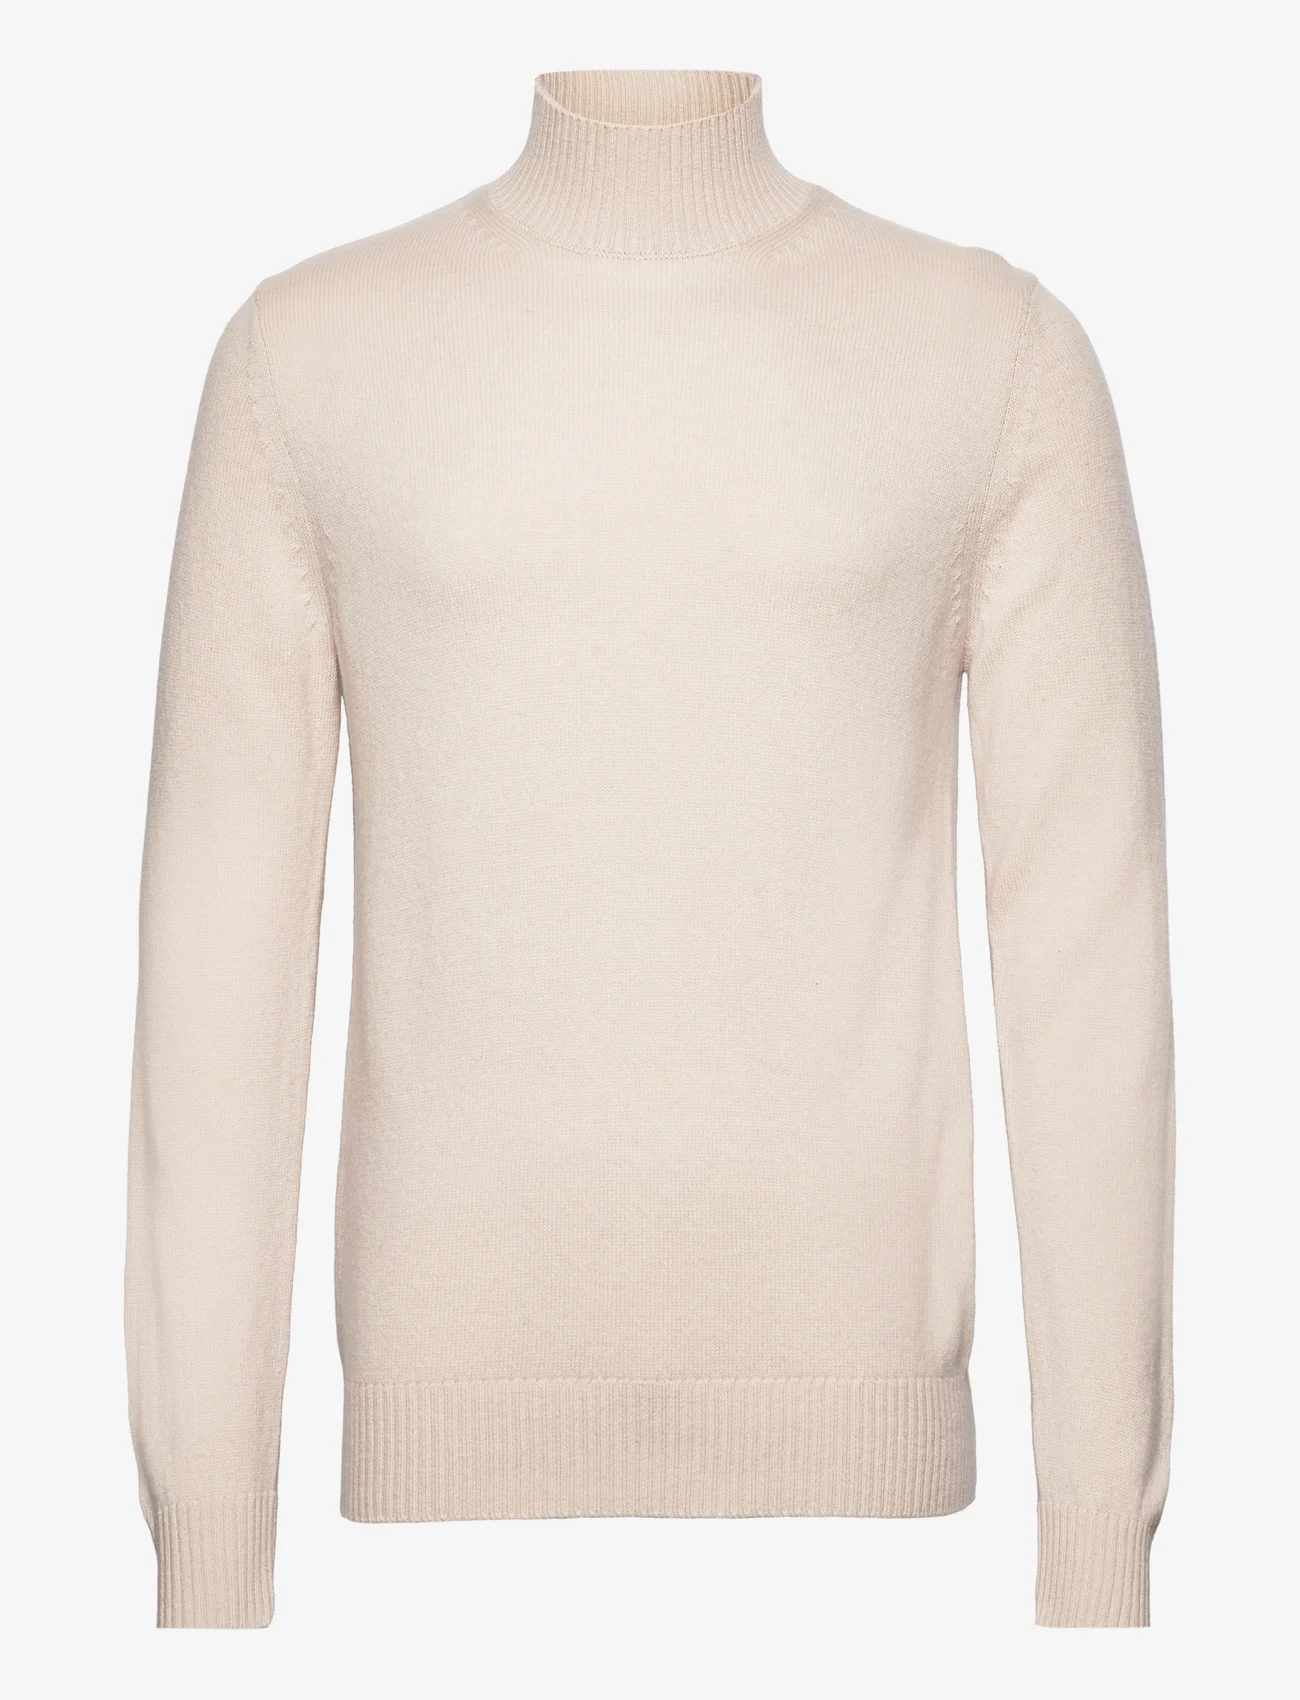 Selected Homme - SLHNEWCOBAN LS KNIT HIGH NECK W - polokrage - oatmeal - 0